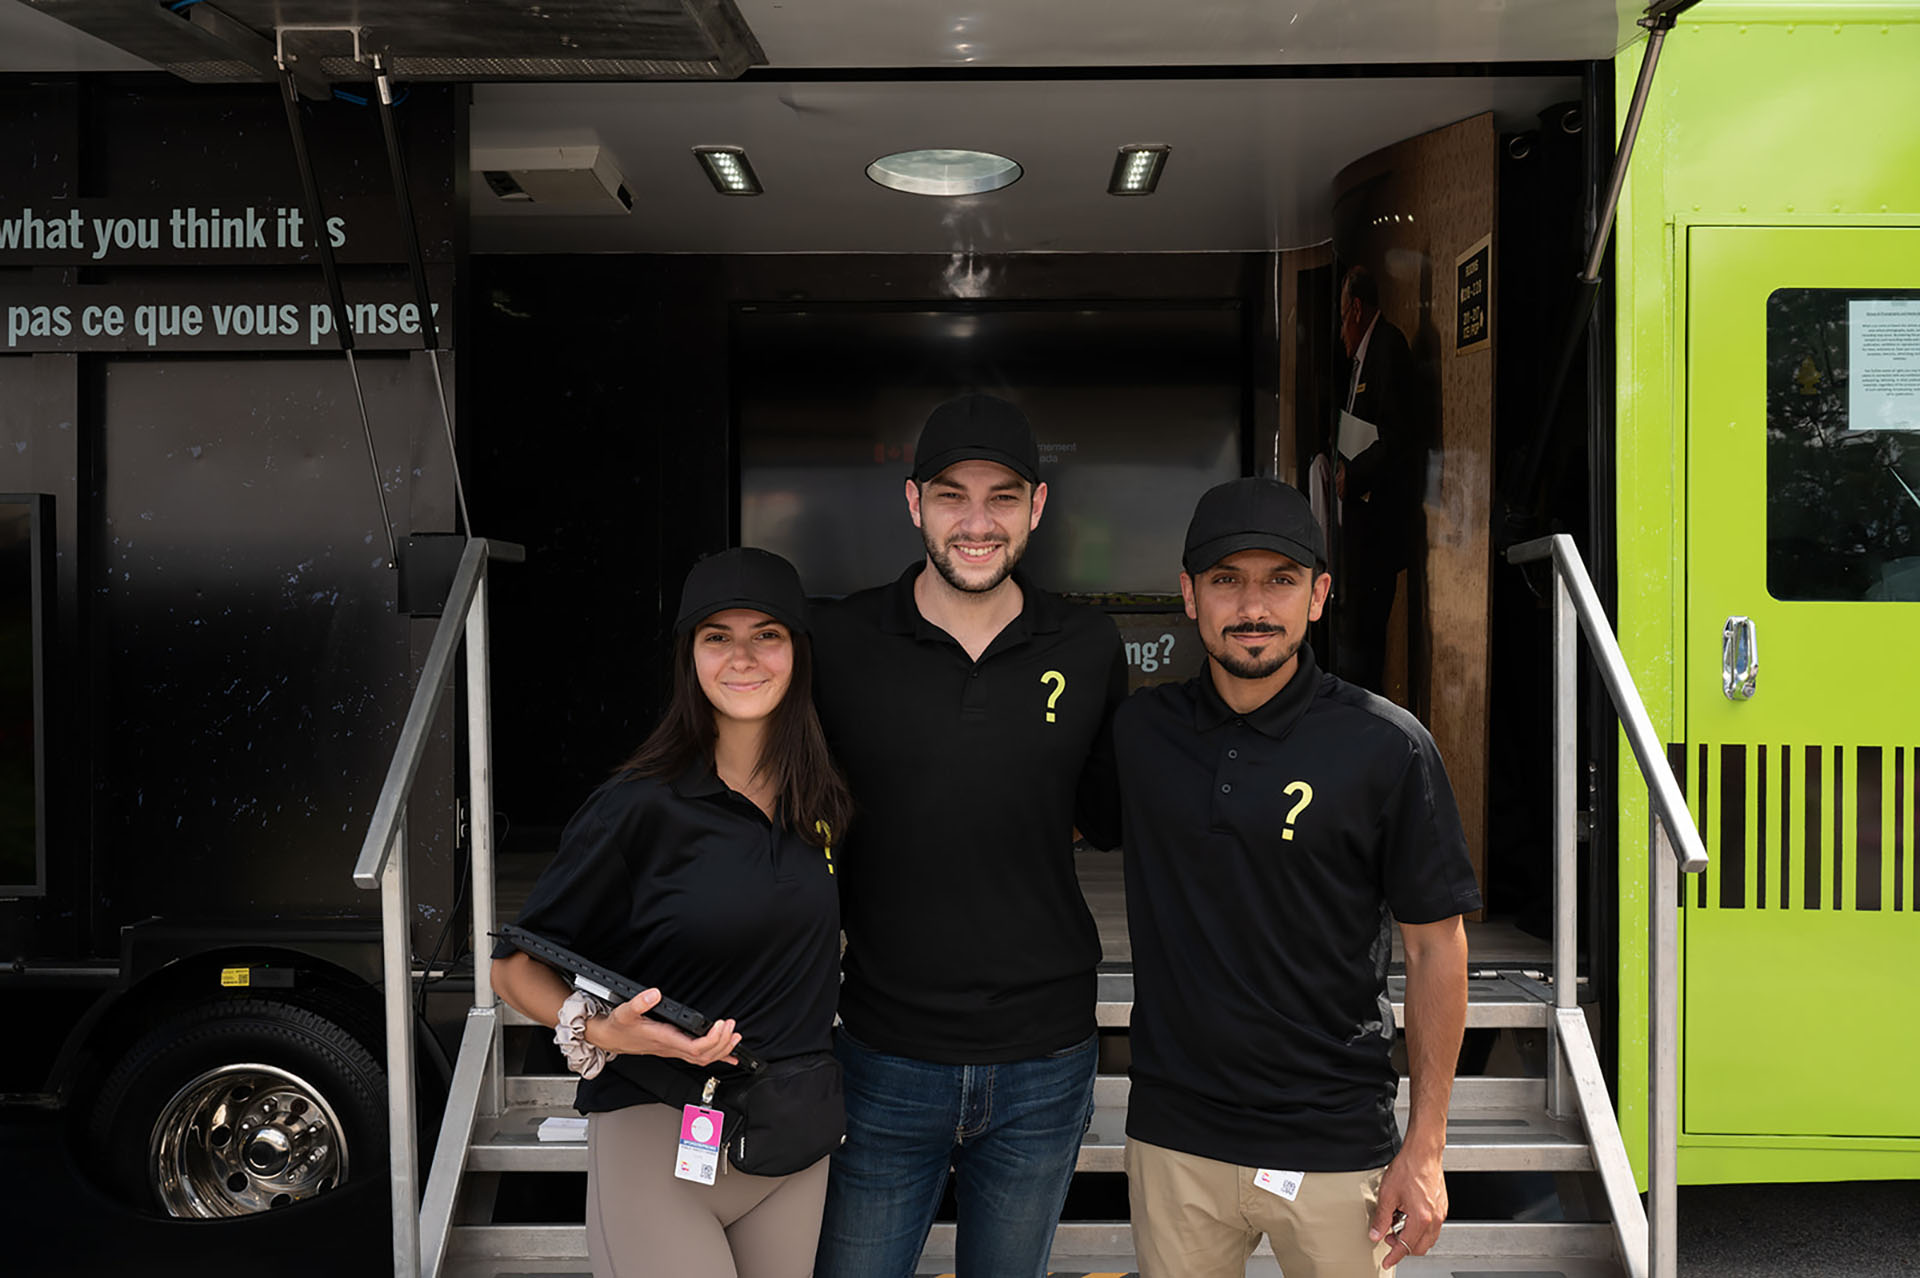 Three people in black t-shirts standing in front of a black and green truck